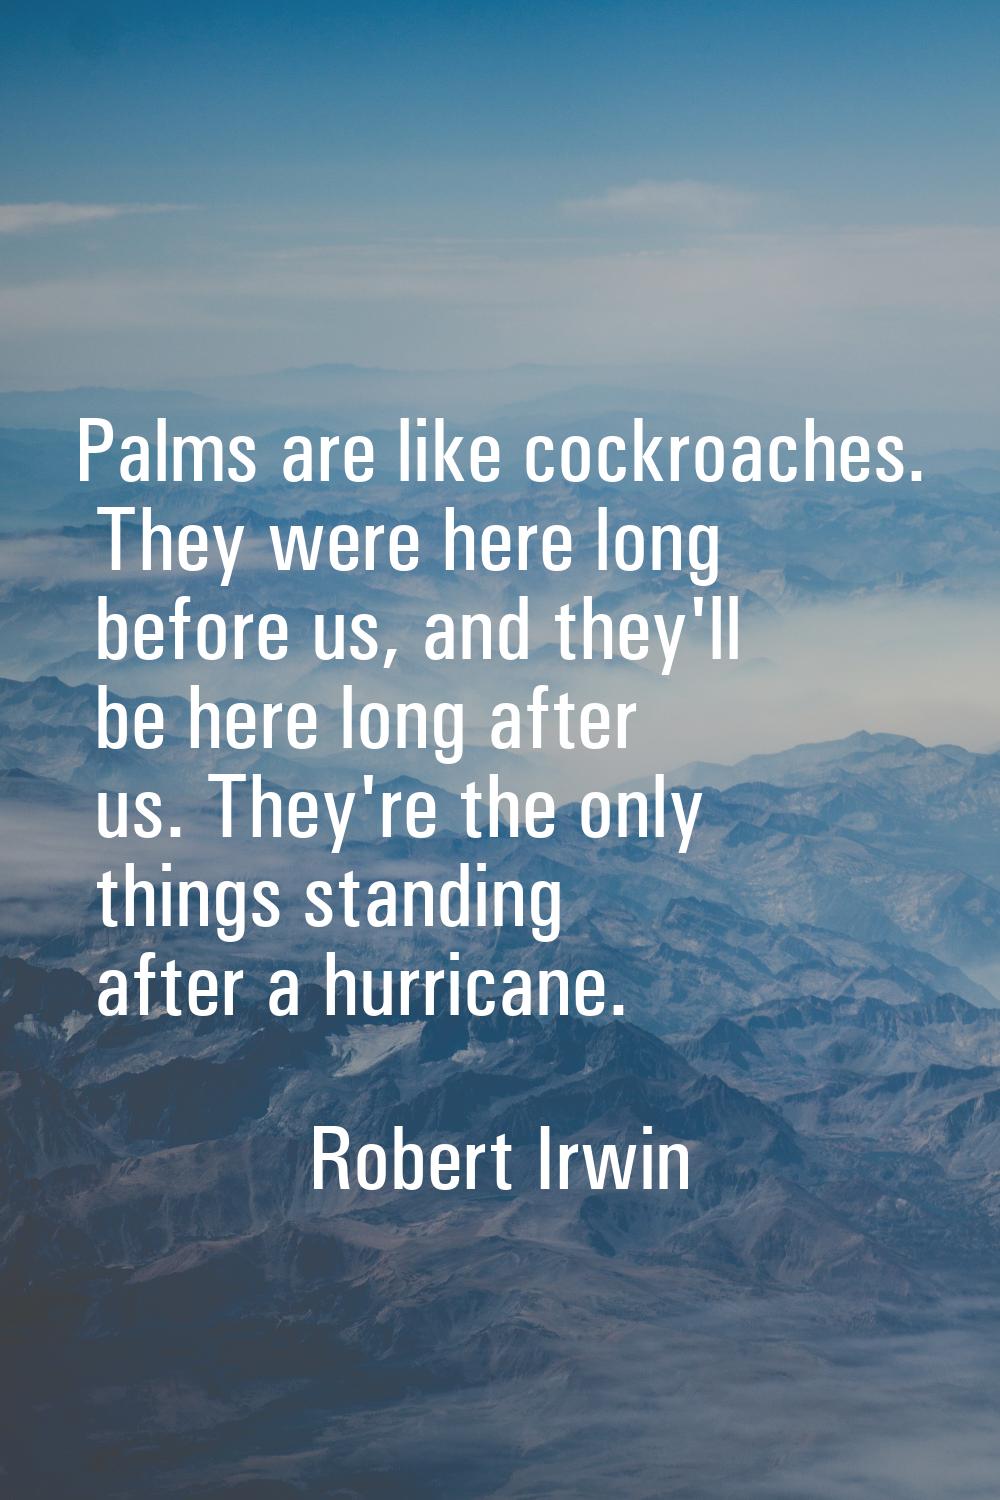 Palms are like cockroaches. They were here long before us, and they'll be here long after us. They'